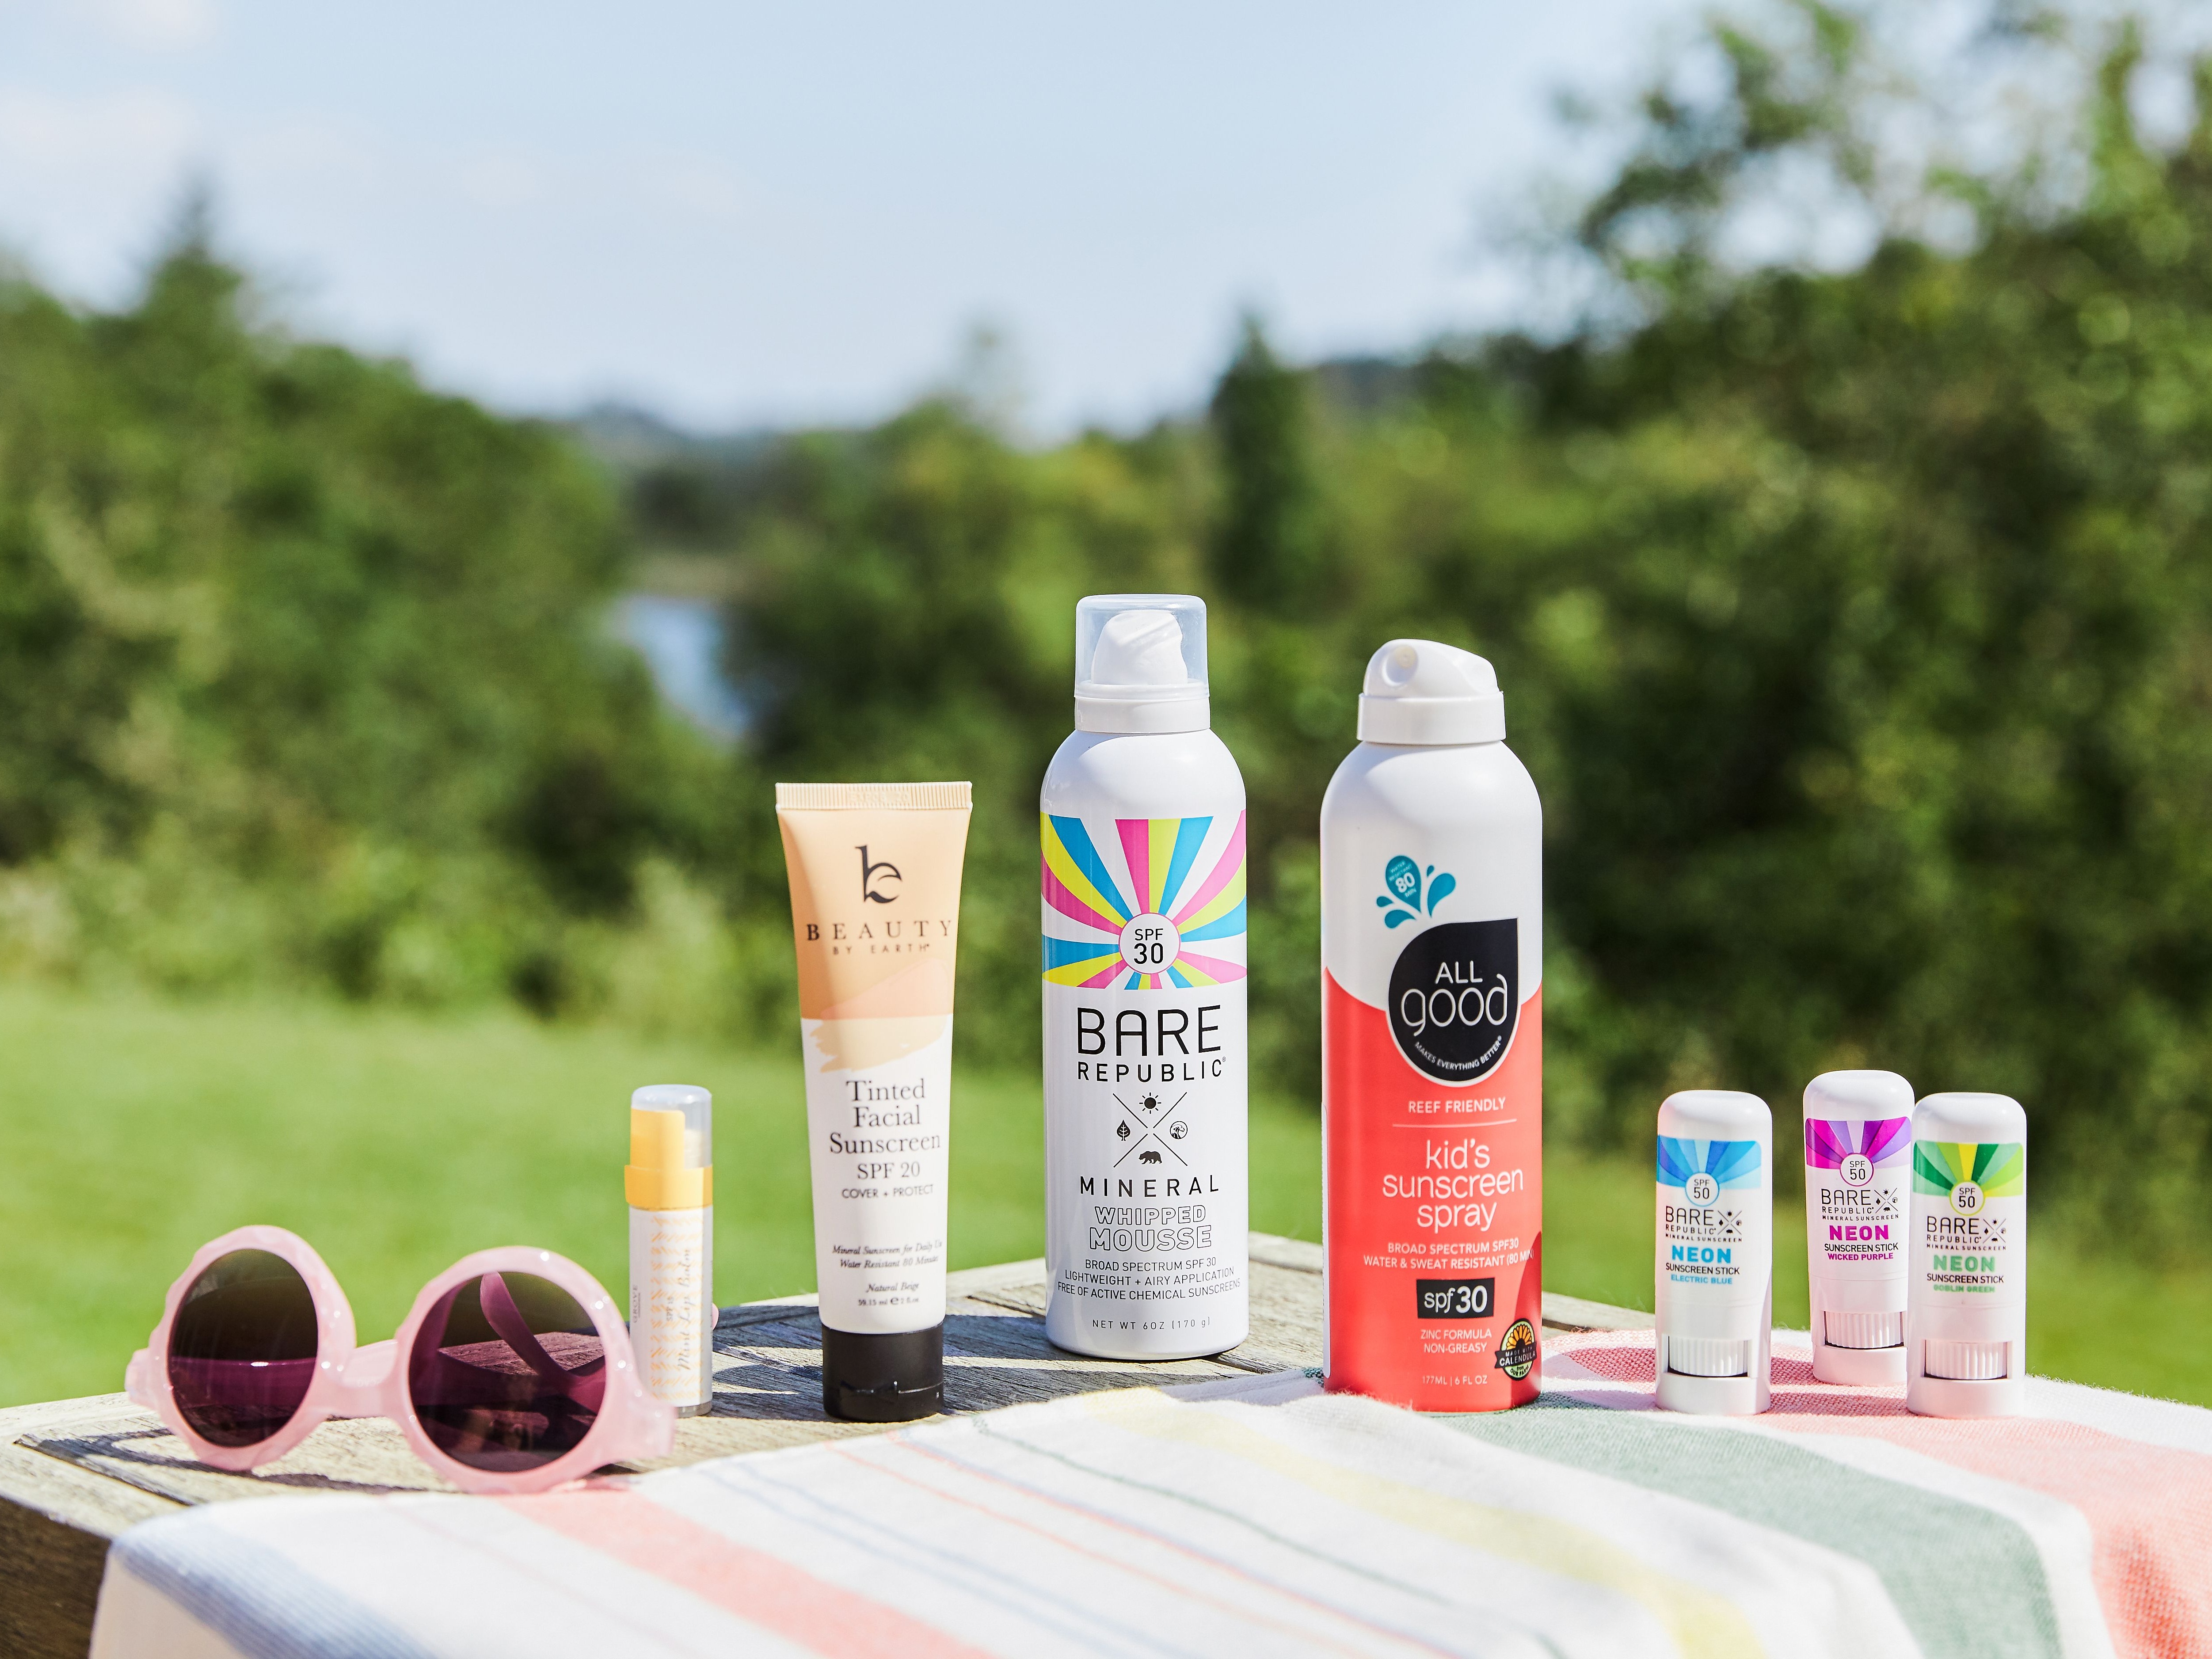 Image of several bottles of brands of mineral sunscreen on striped tablecloth next to pink sunglasses